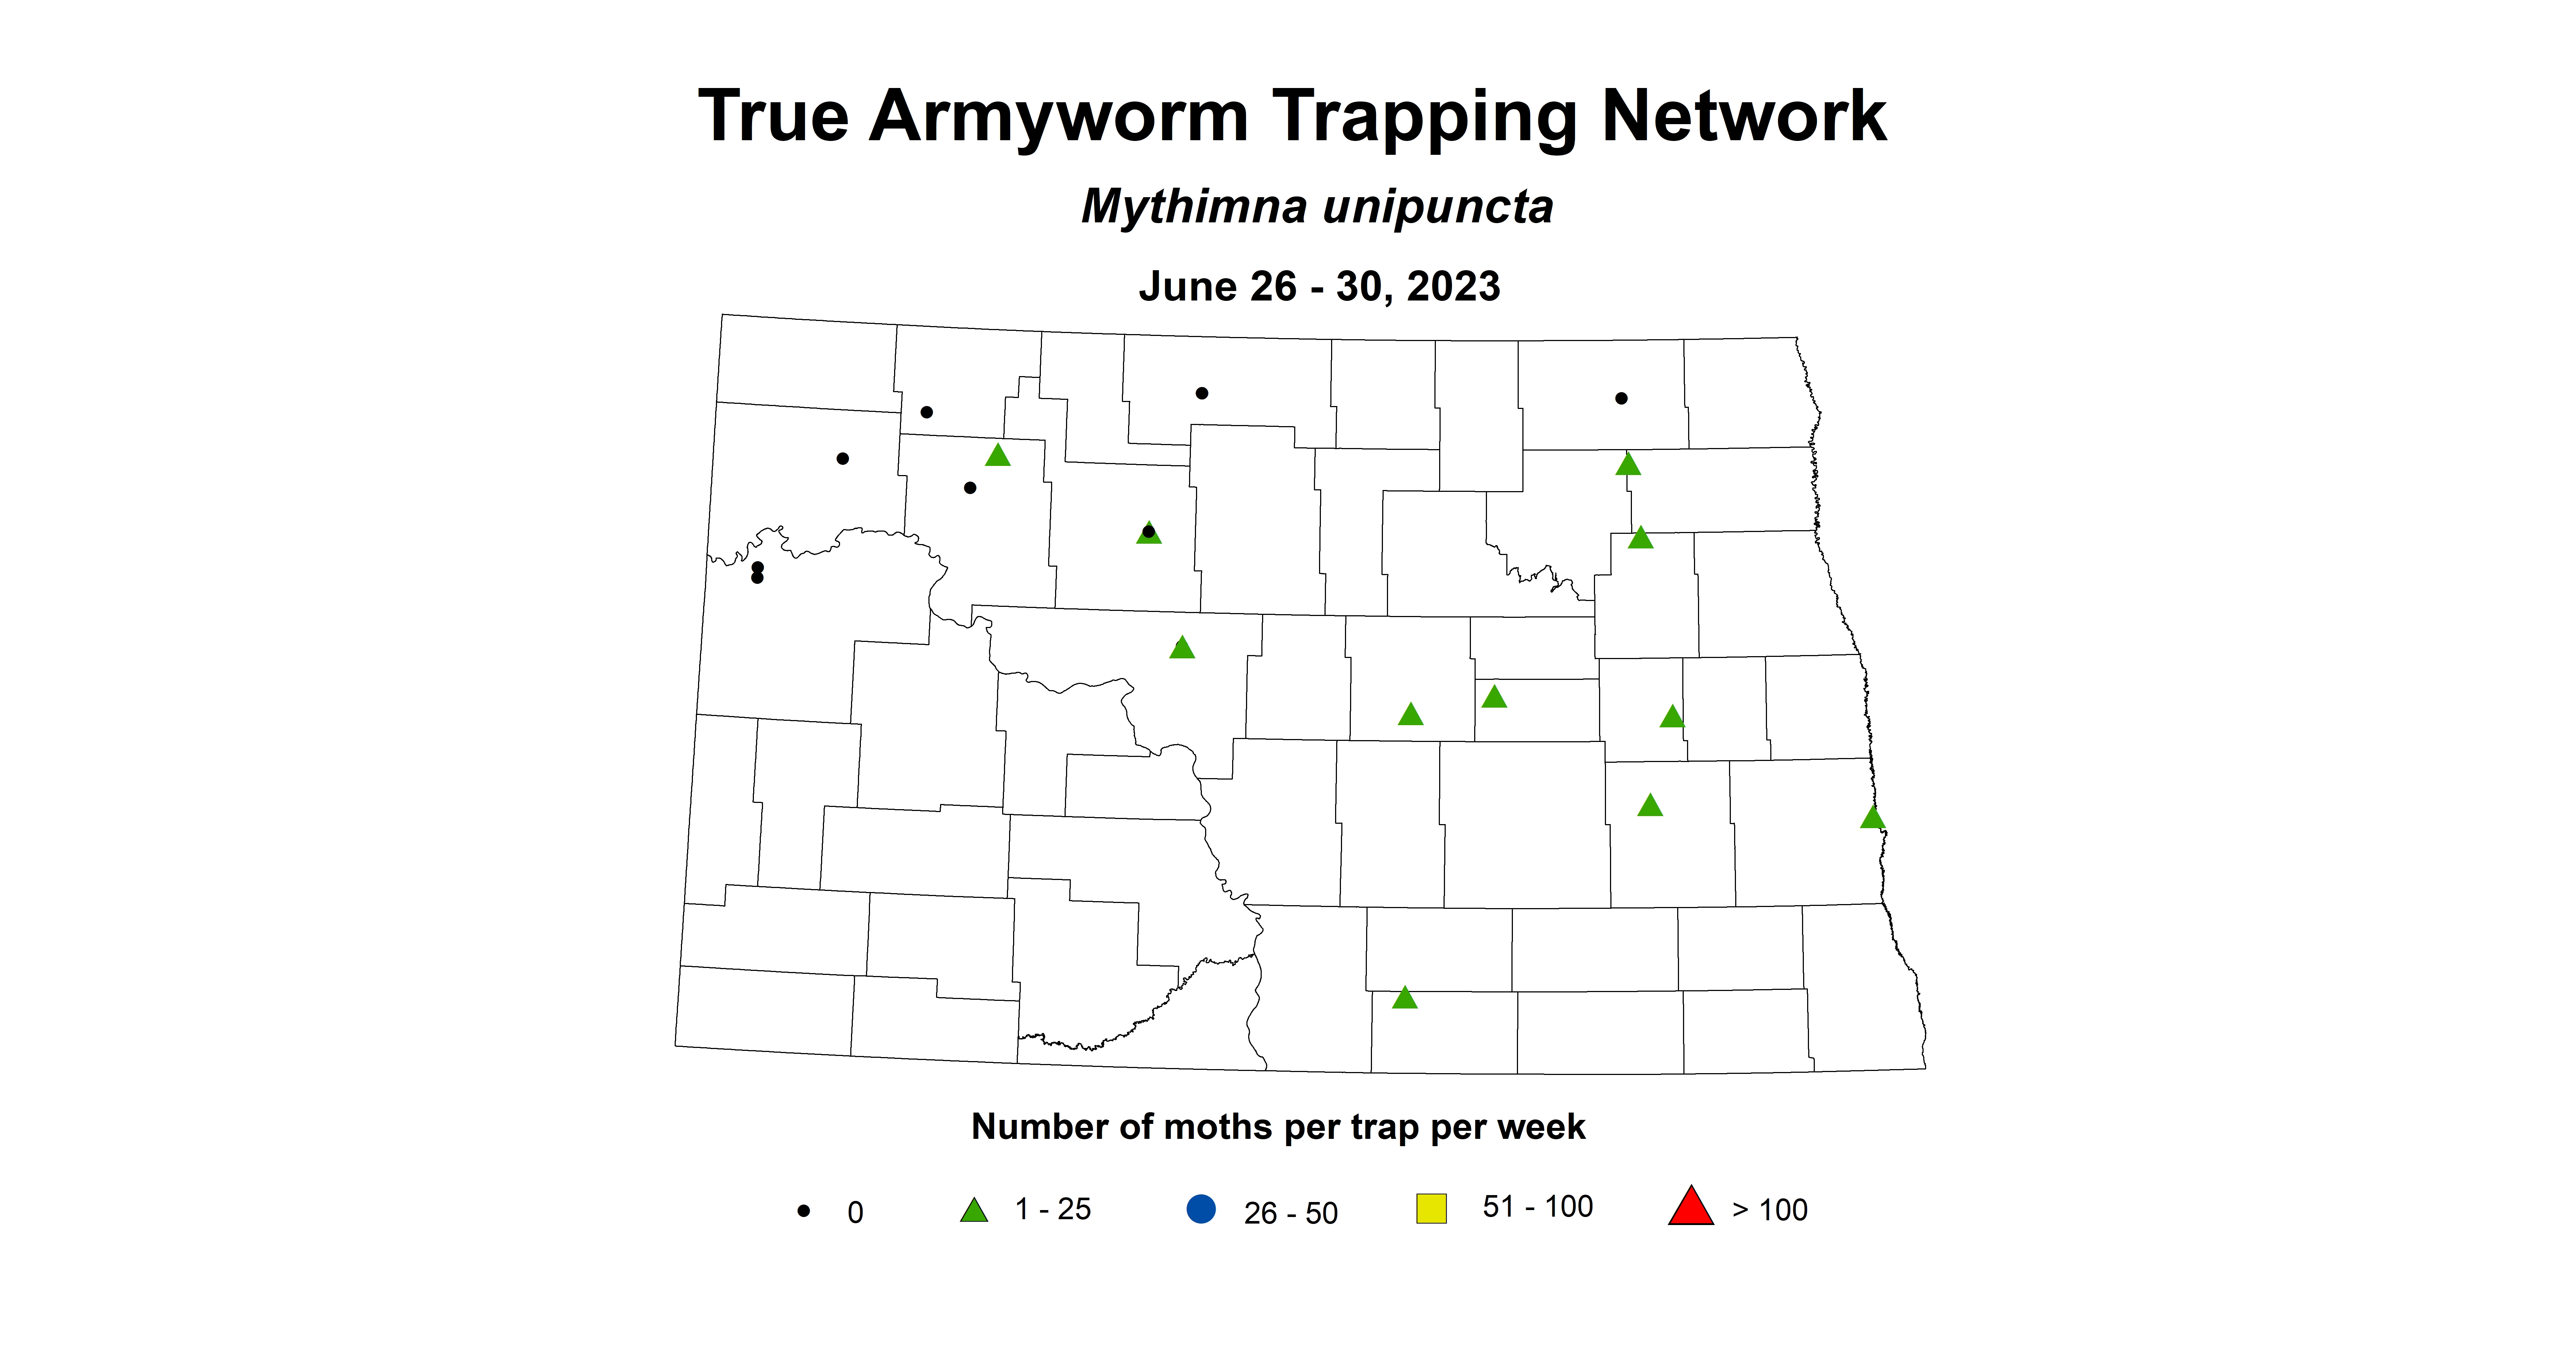 wheat insect trap true armyworm June 26-30 2023